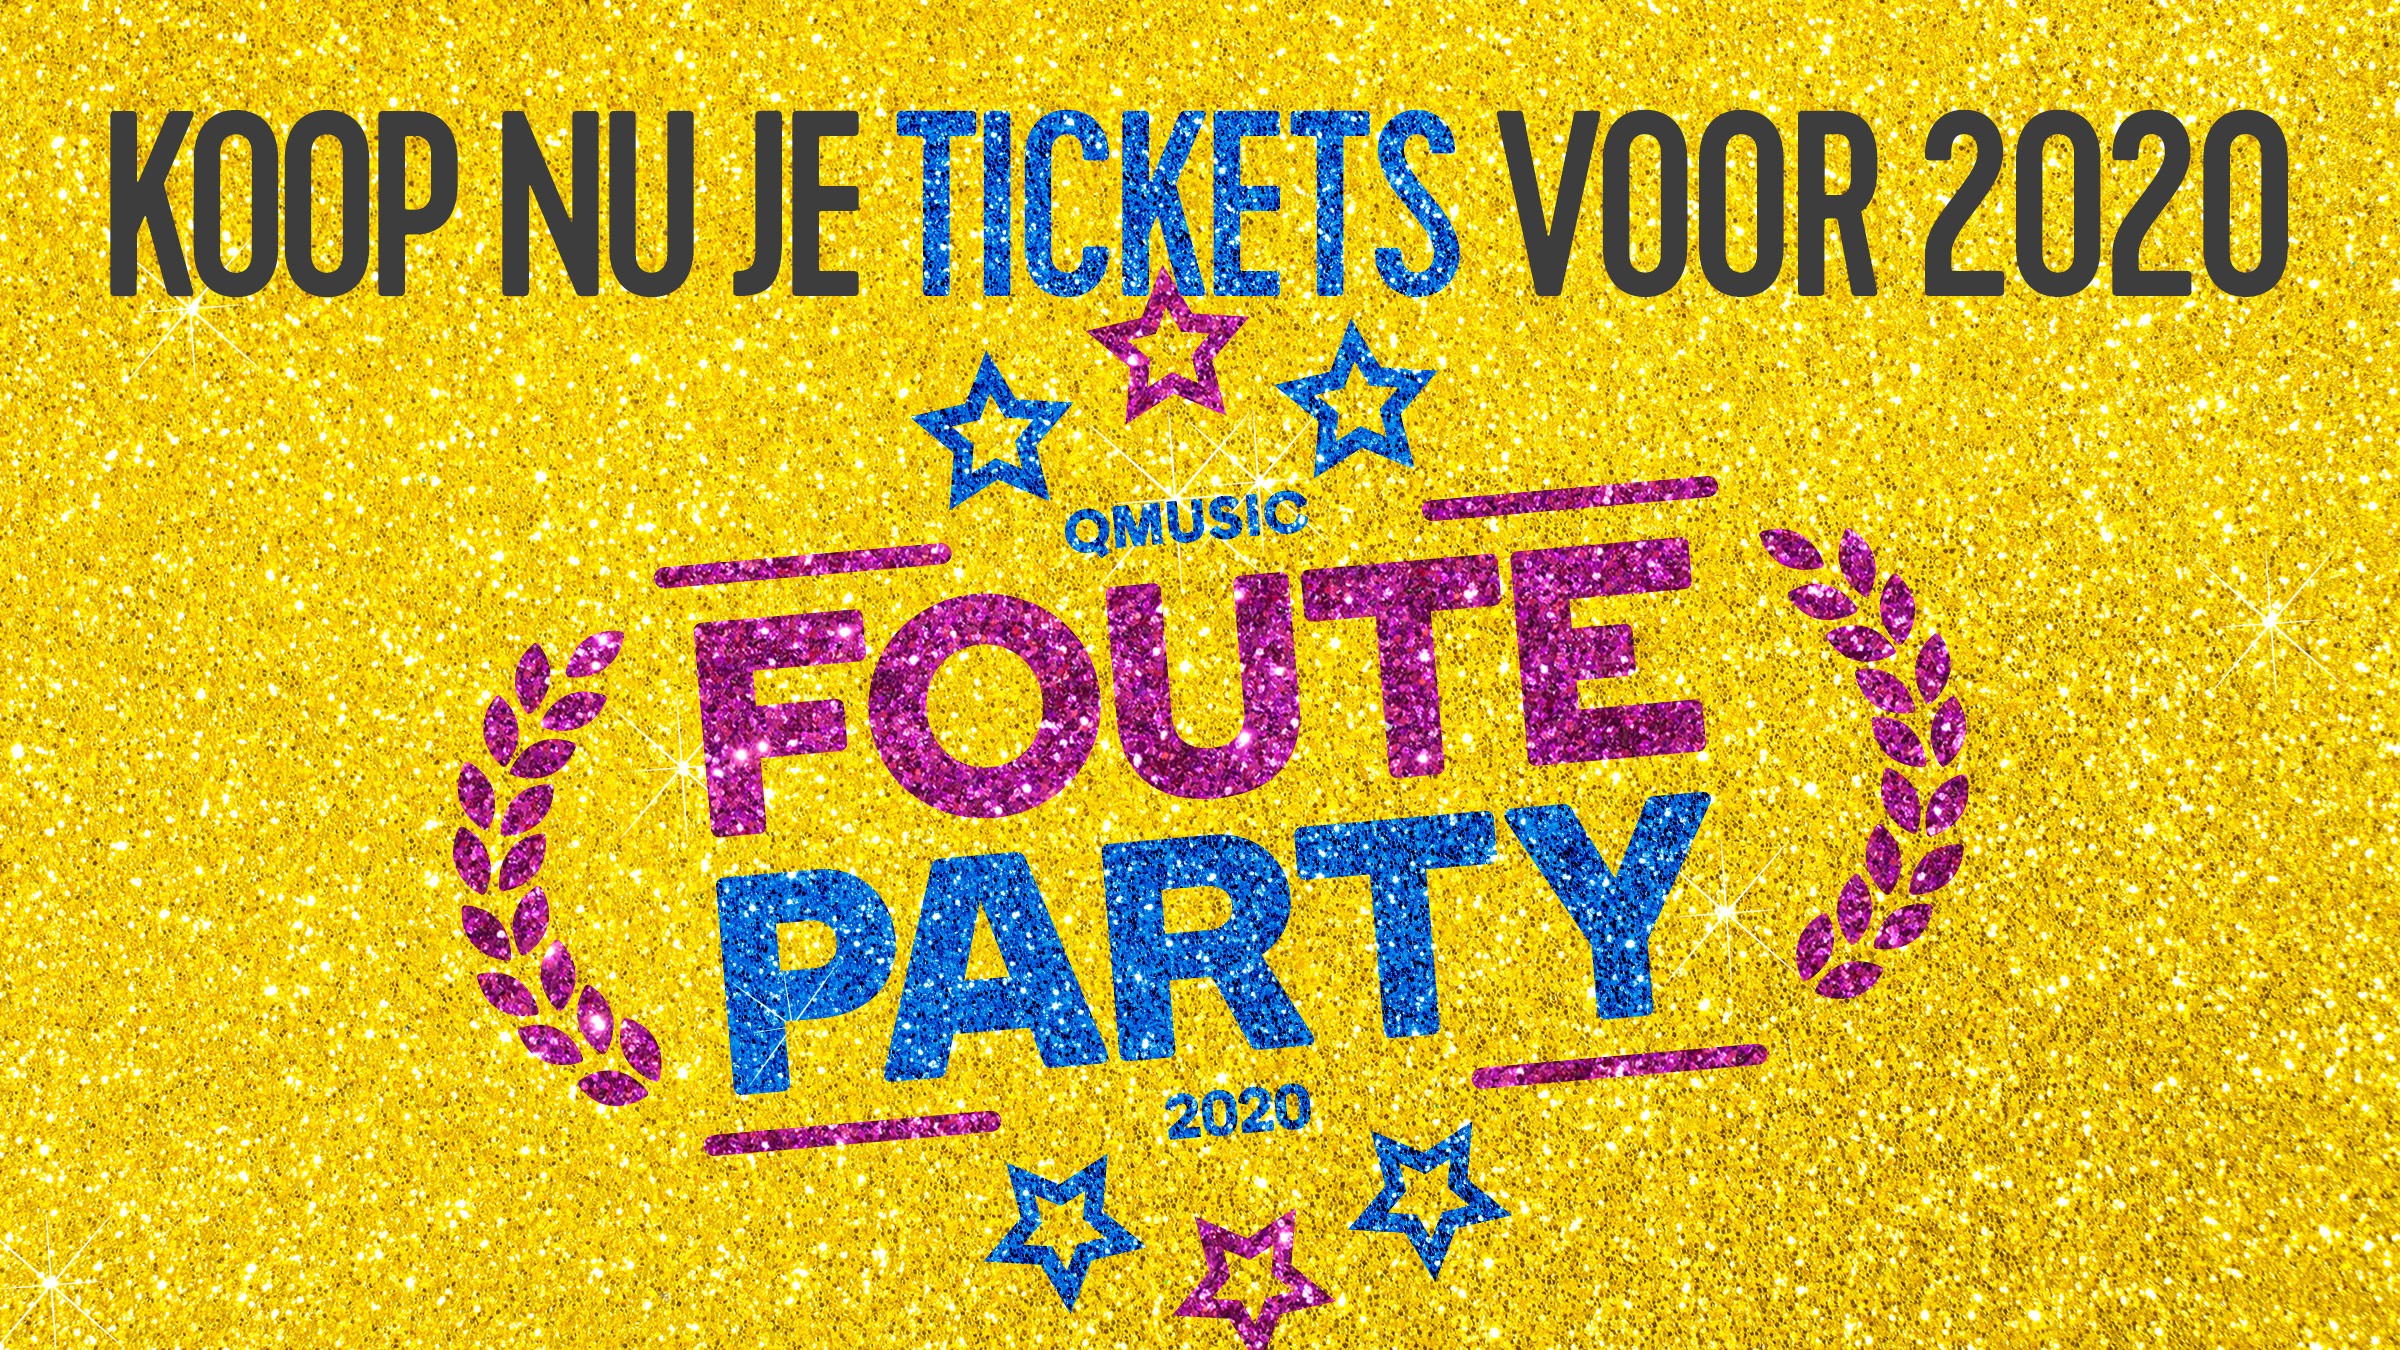 Qmusic teaser fouteparty2020 tickets